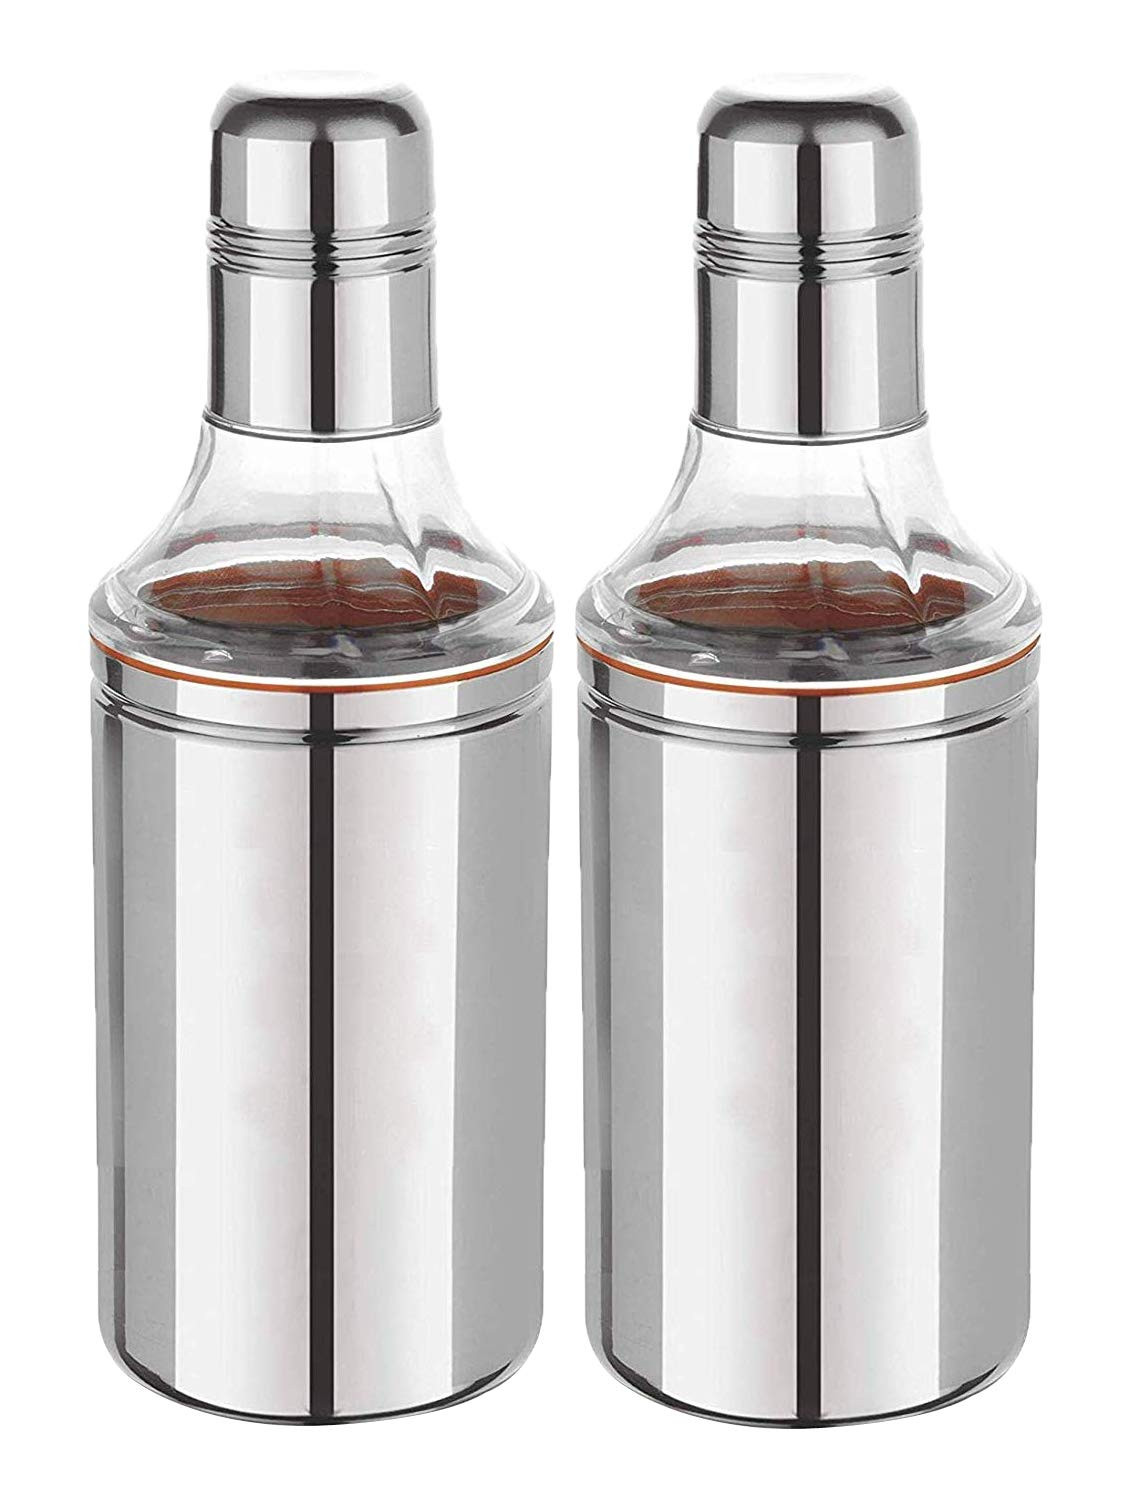 Kuber Industries Stainless Steel Oil Dispensers for Kitchen use with Sharp Finish, Slim, Look 500 Ml,Silver